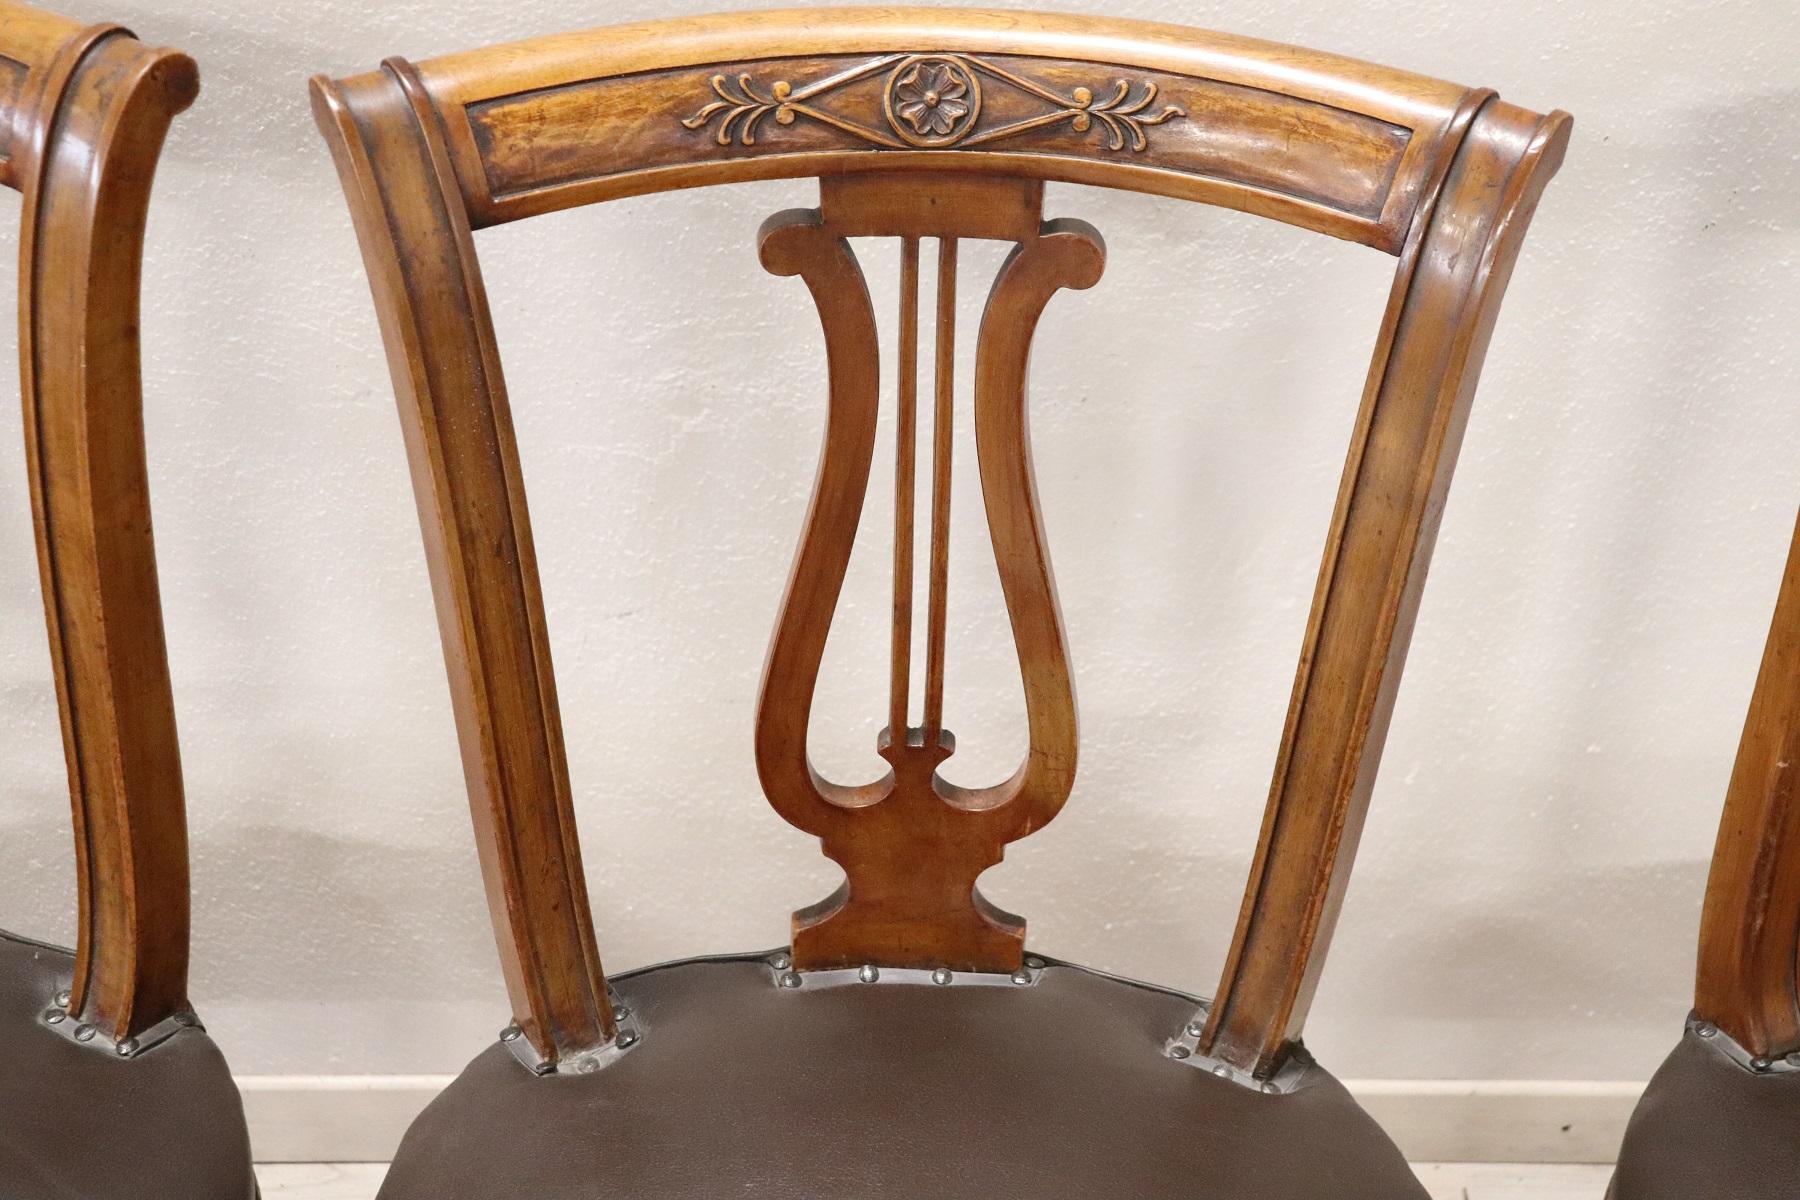 20th Century Italian Neoclassical Style Walnut Carved Set of Six Chairs (Geschnitzt)